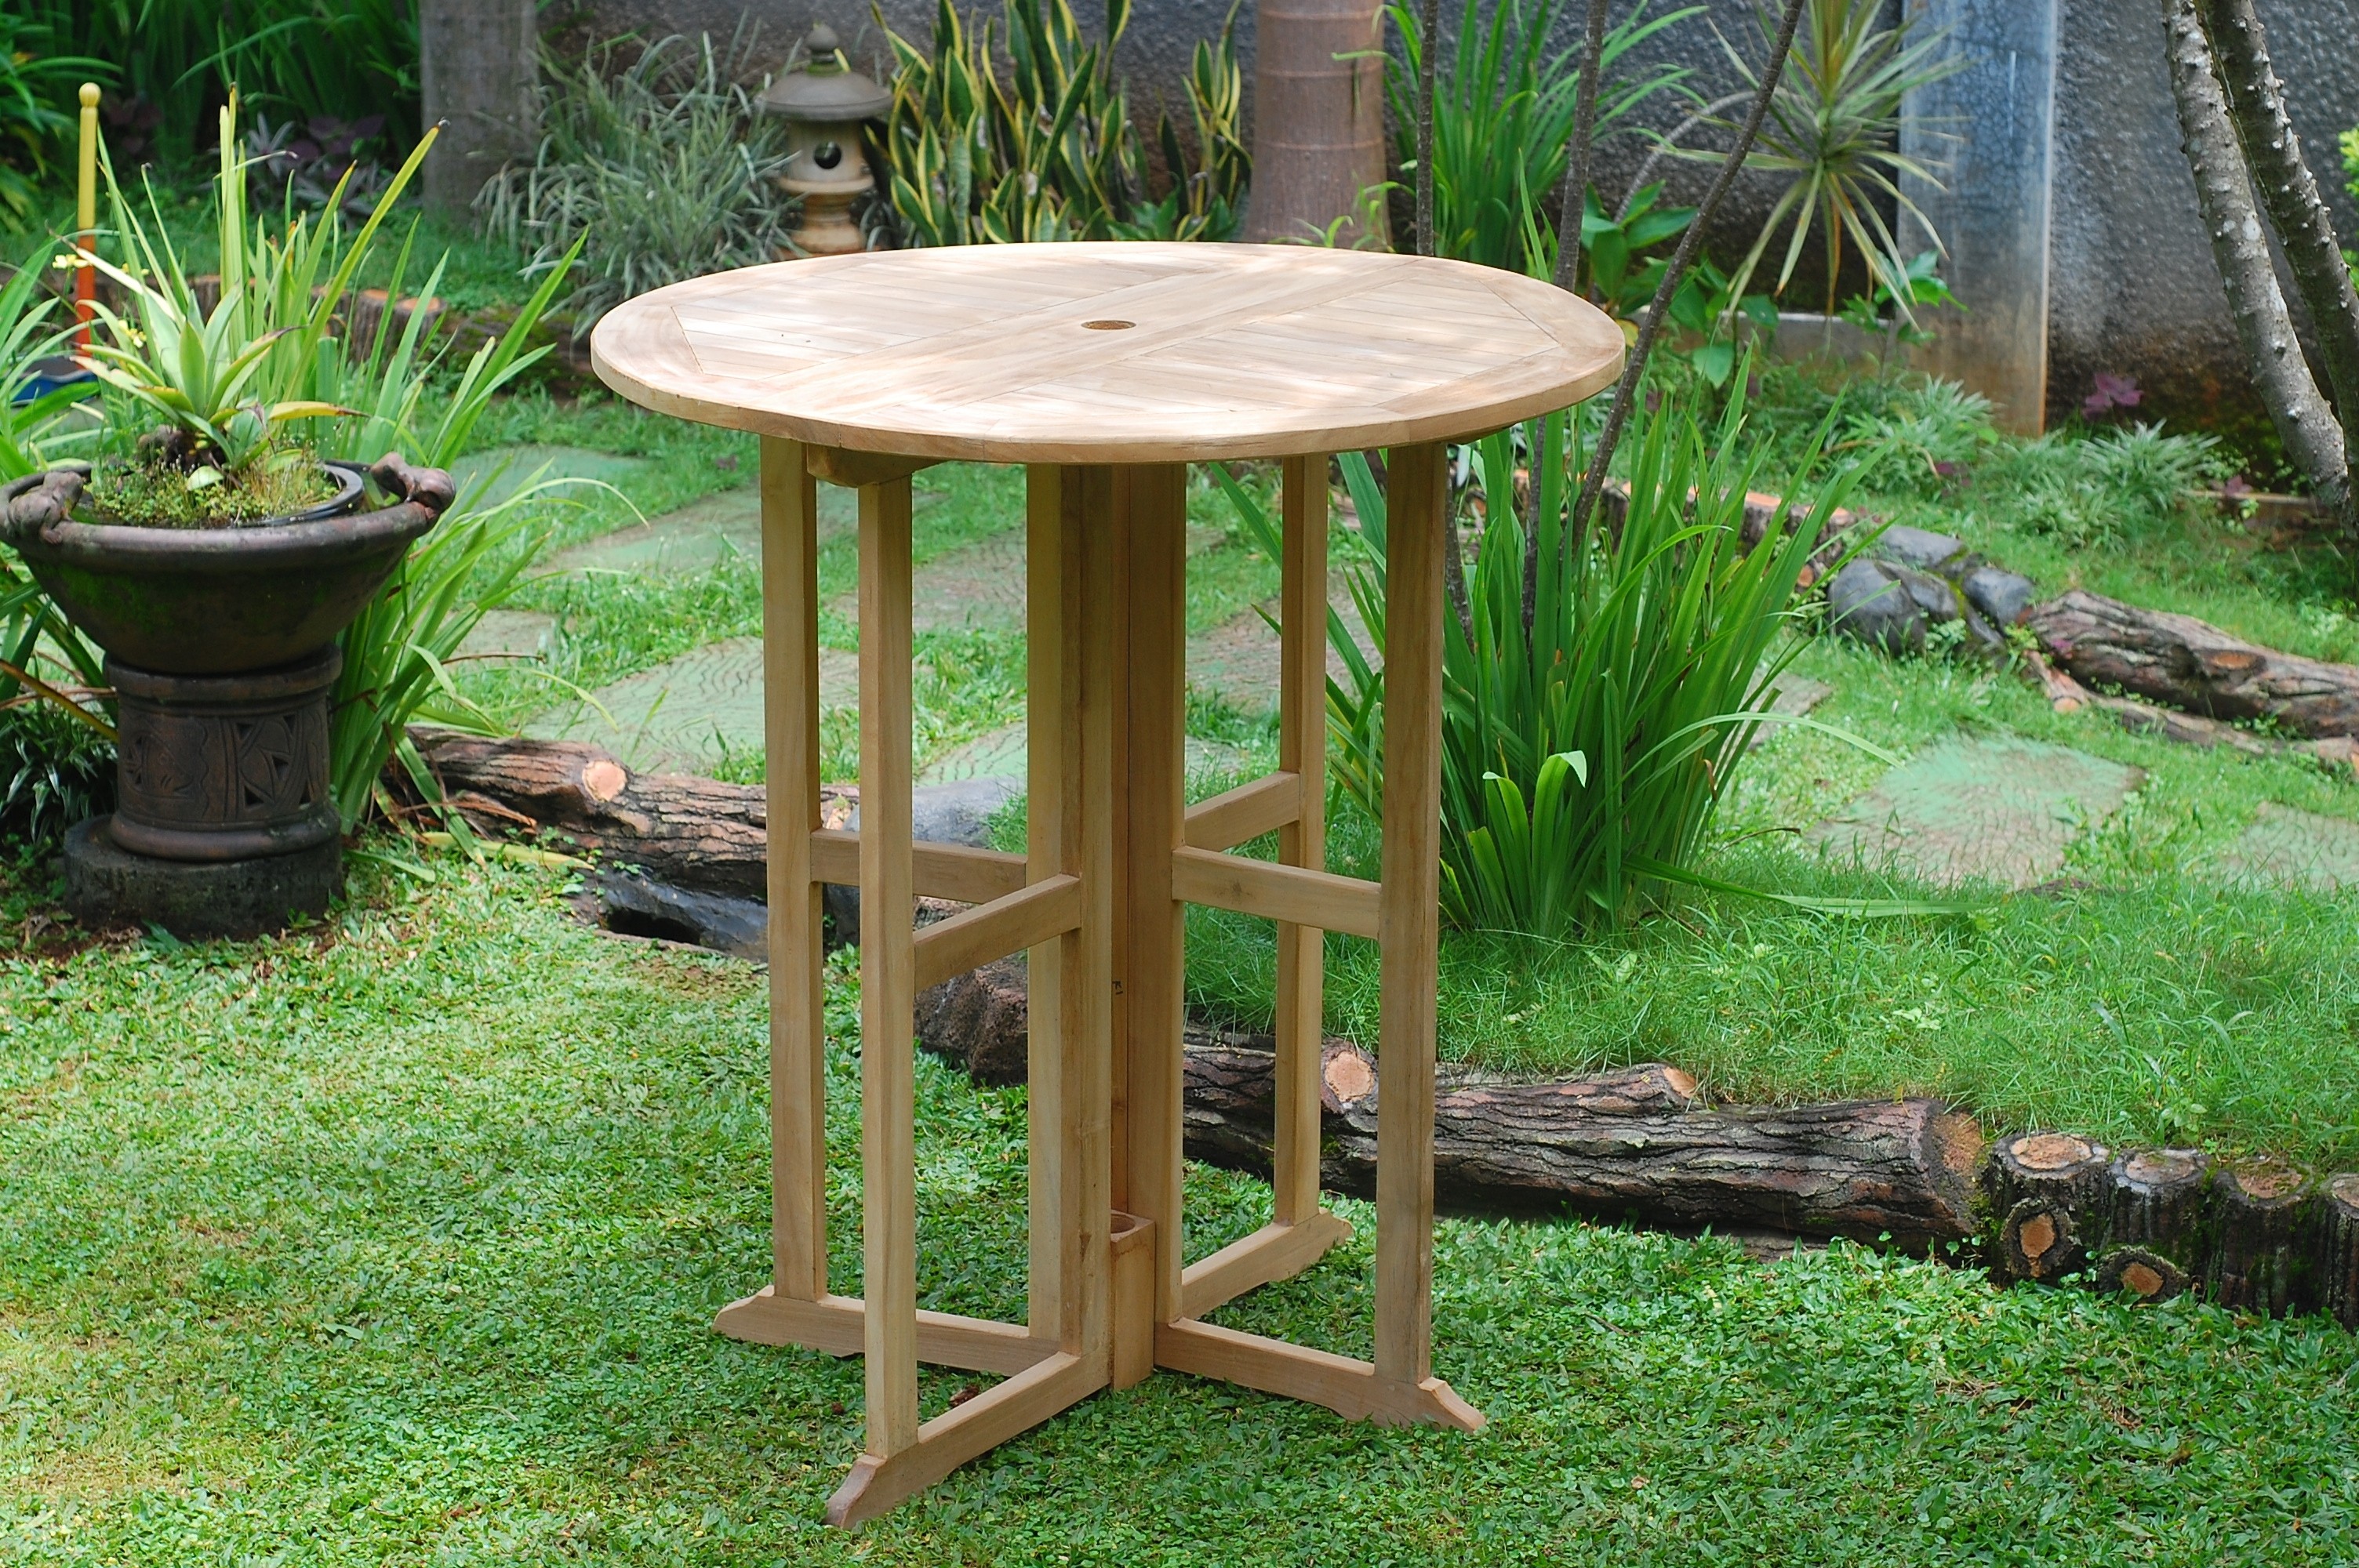 Bimini 47" Round Drop Leaf Folding Teak Counter Table ...use w/ 1 Leaf Up or 2....Makes 2 different tables (Counter height is 5" lower than bar)